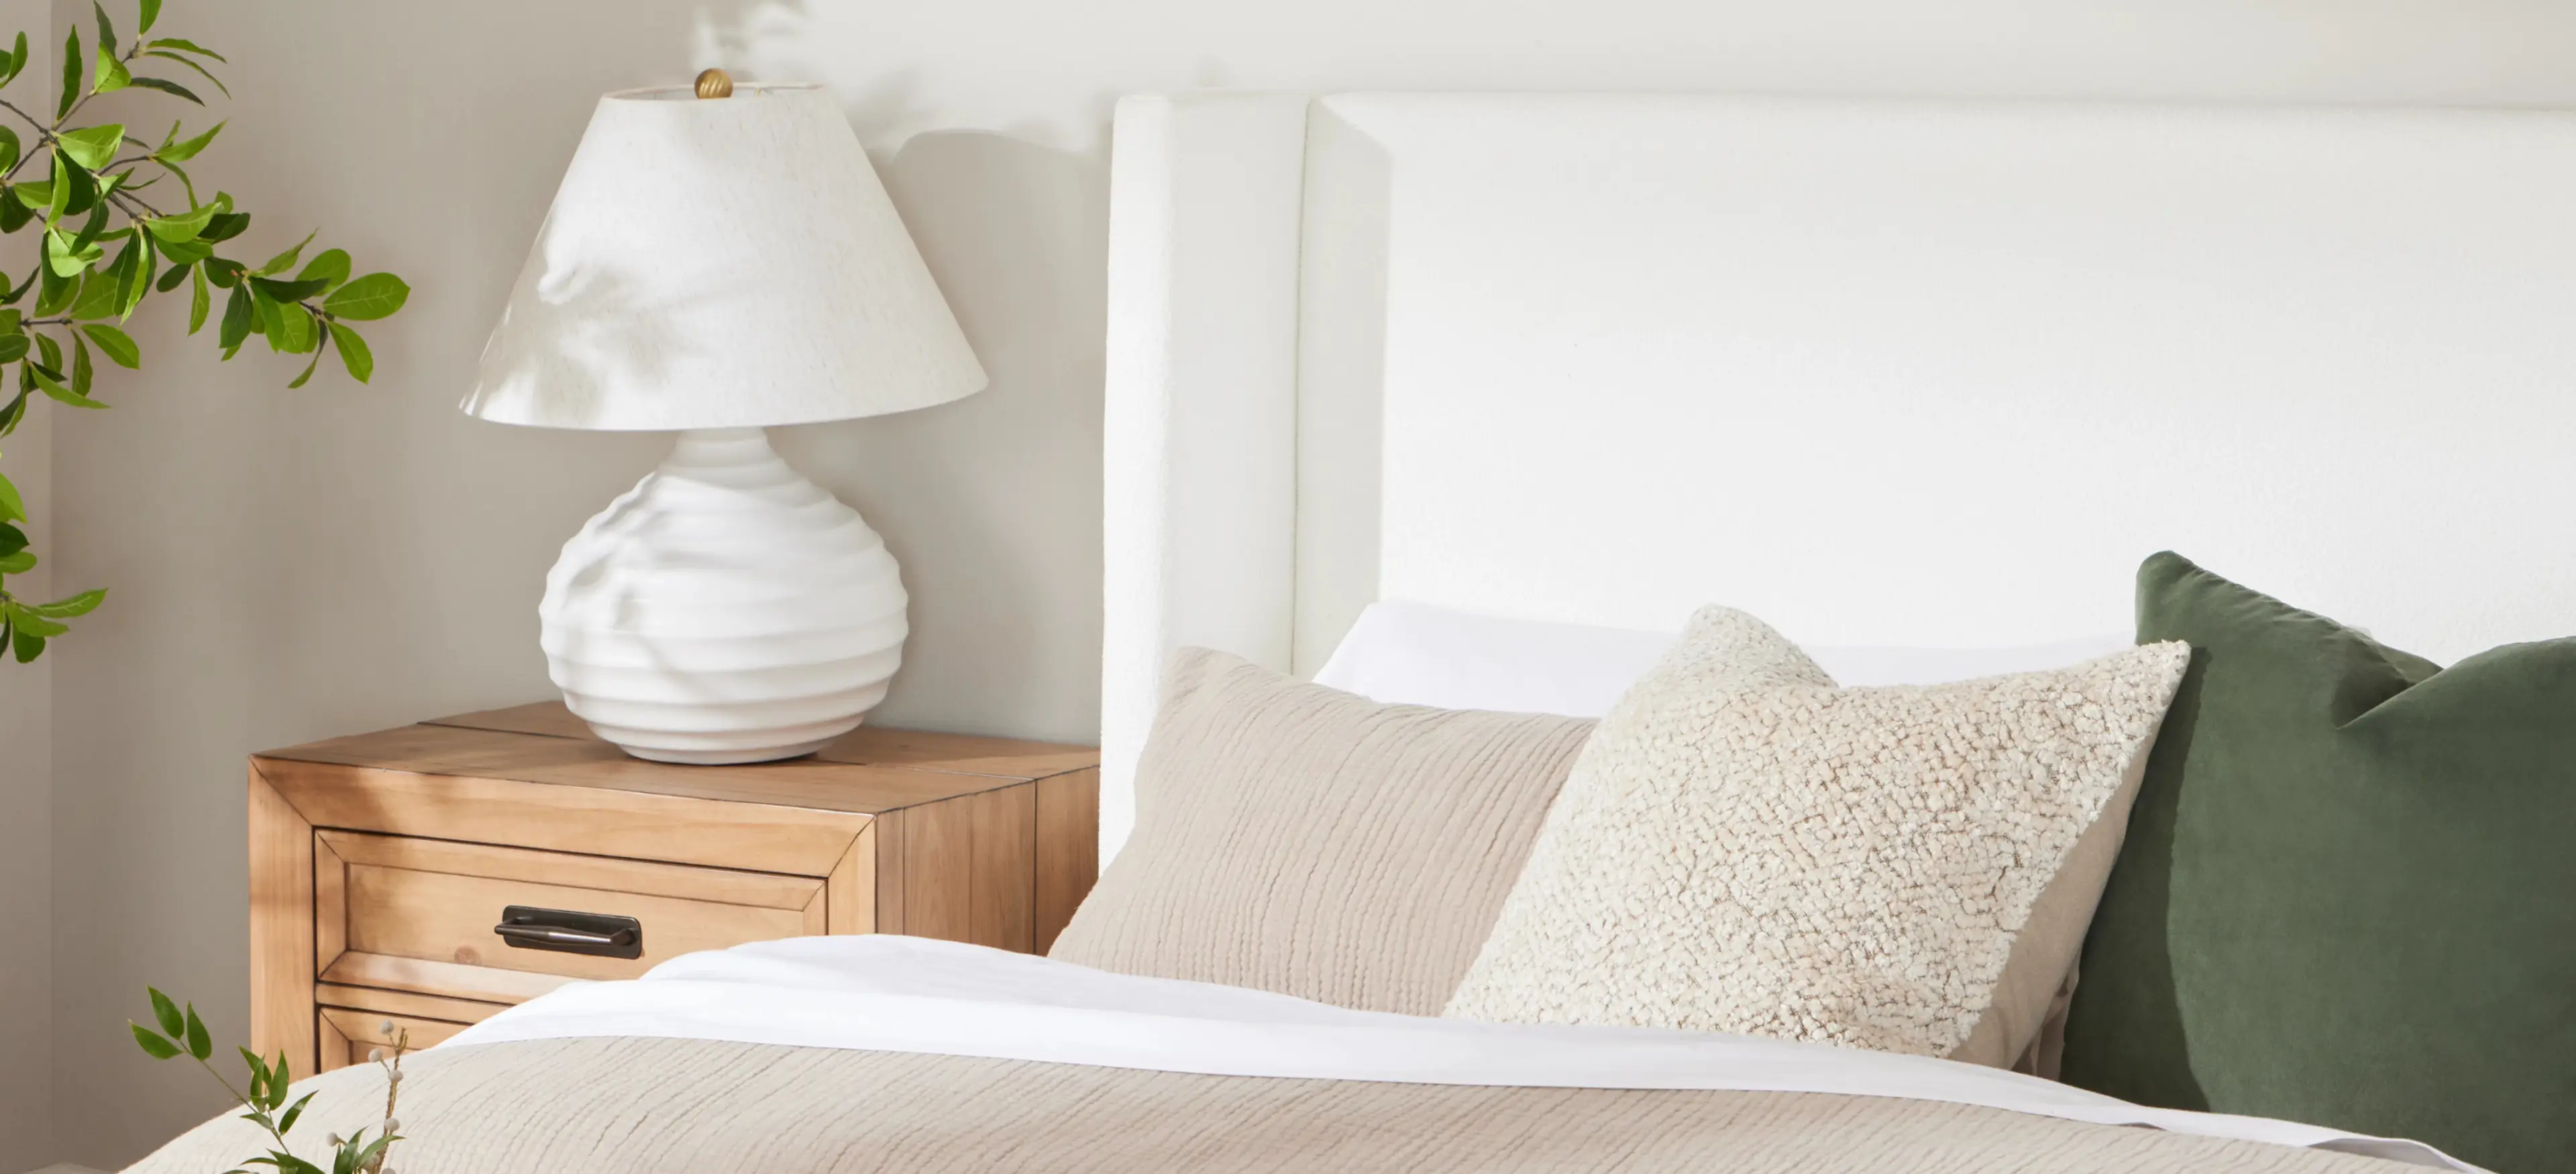 Creating a Warm and Welcoming Space: Essentials for A Guest Room